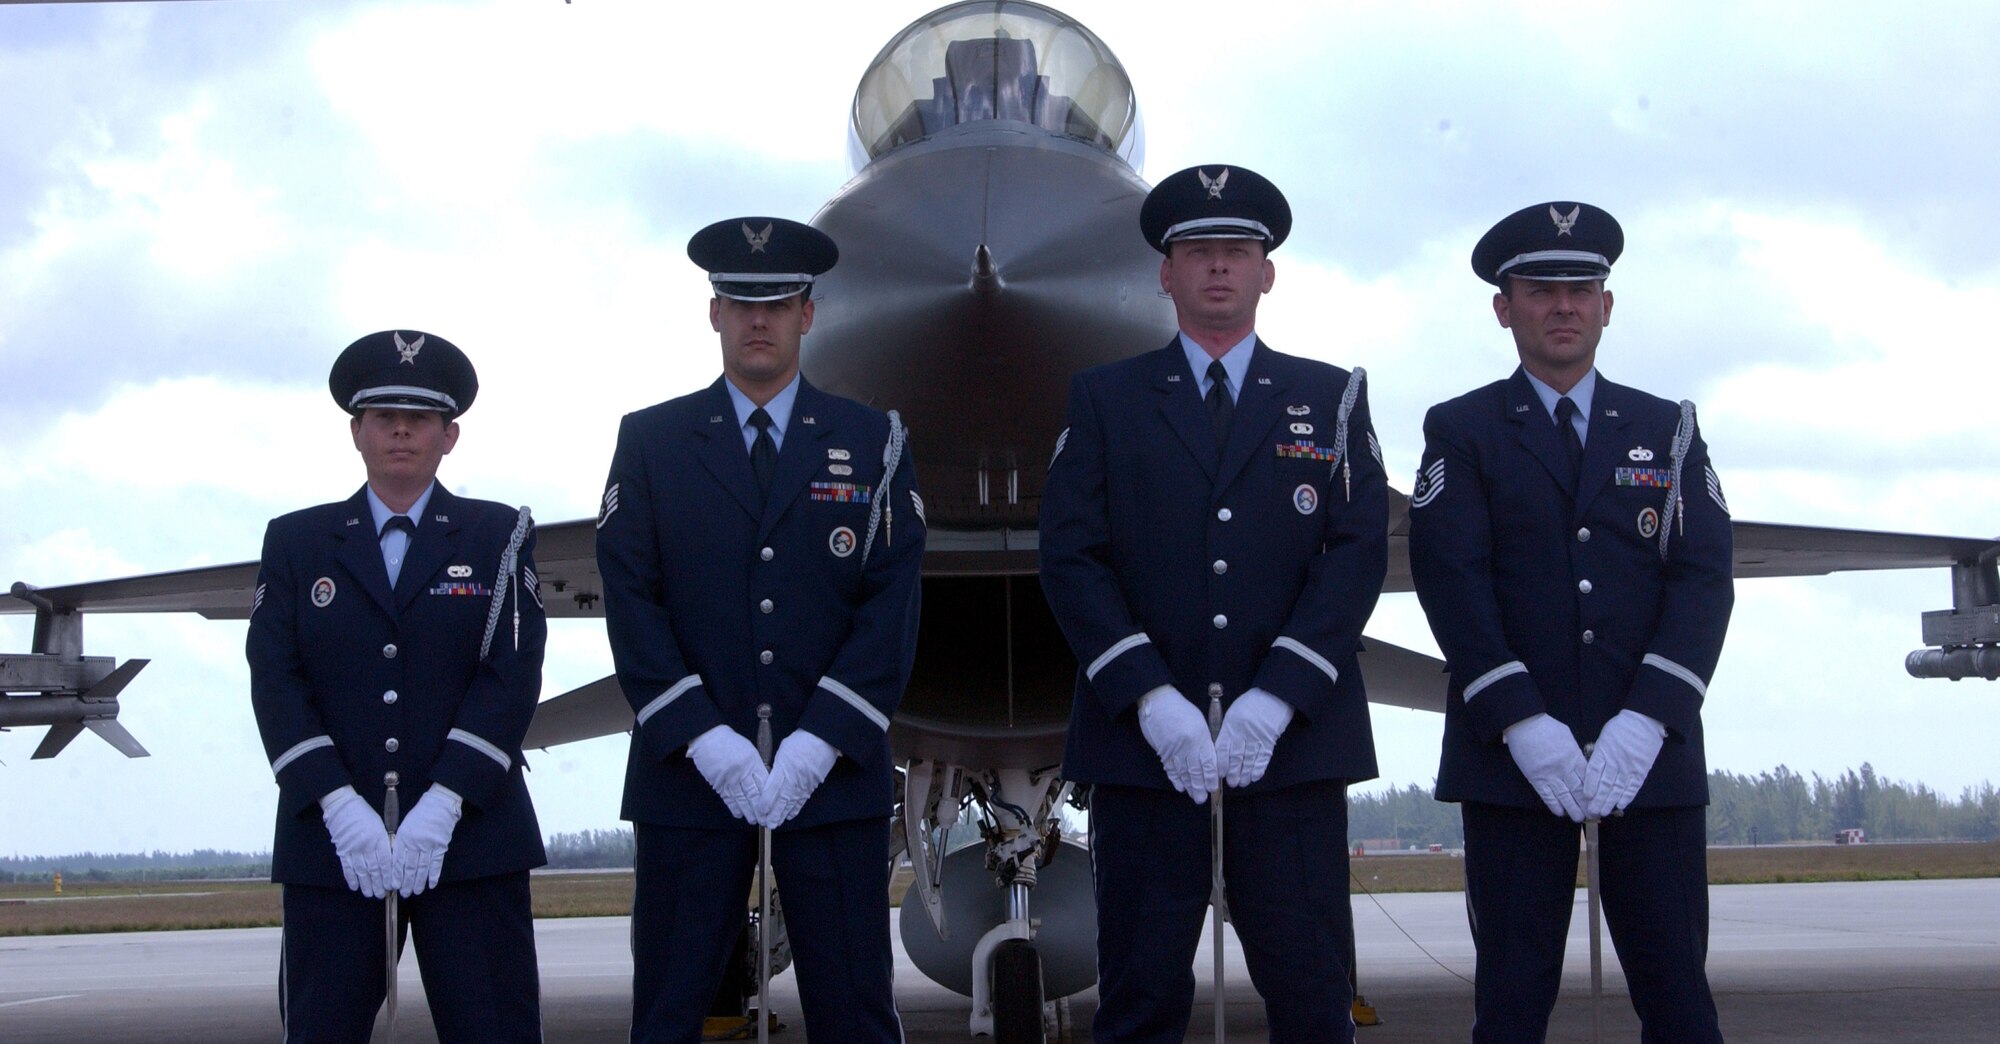 Homestead ARB, Fla. -- members of the Homestead Air Reserve Base Honor Guard stand with an F-16 Mako from the 93d Fighter Squadron.  From left to right:  Staff Sgt. Natasha Jamass, Staff Sgt. Luis Pacheco, Staff Sgt. Ryan Ayers and Technical Sgt. Francisco Navarro.  (U.S. Air Force Reserve photo by Jake Shaw).